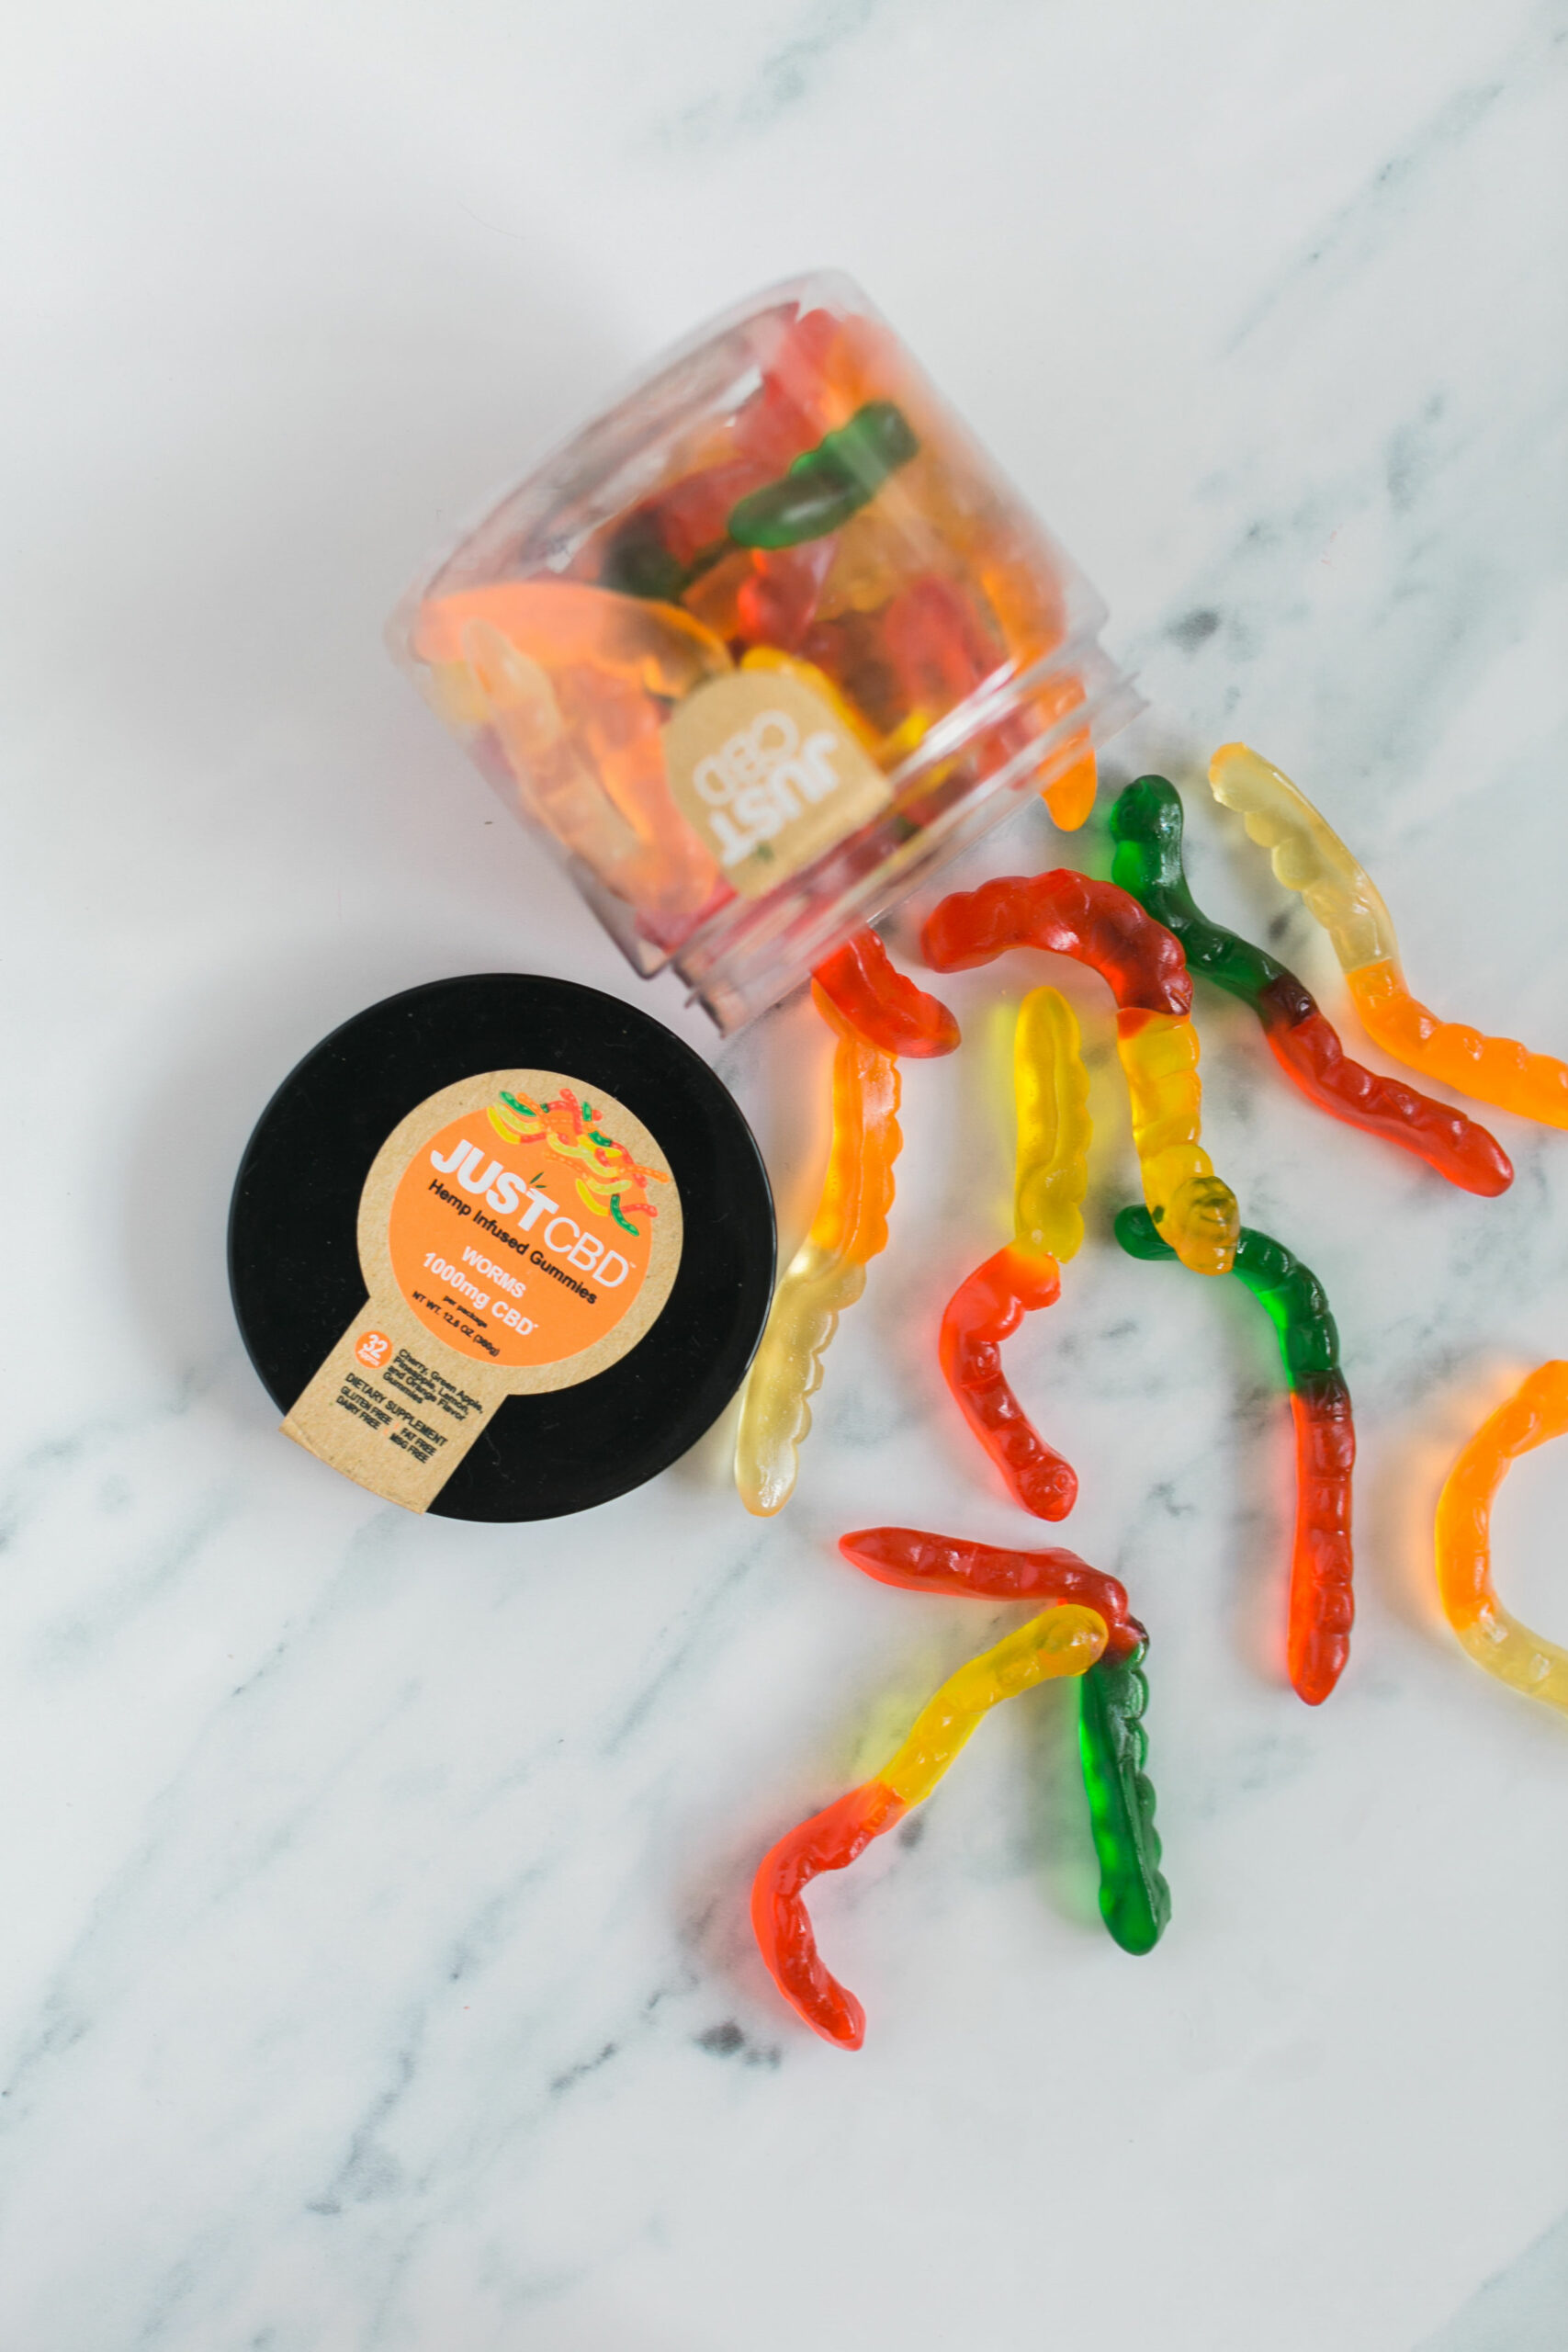 10 THINGS TO LOOK FOR WHEN PURCHASING CBD GUMMIES